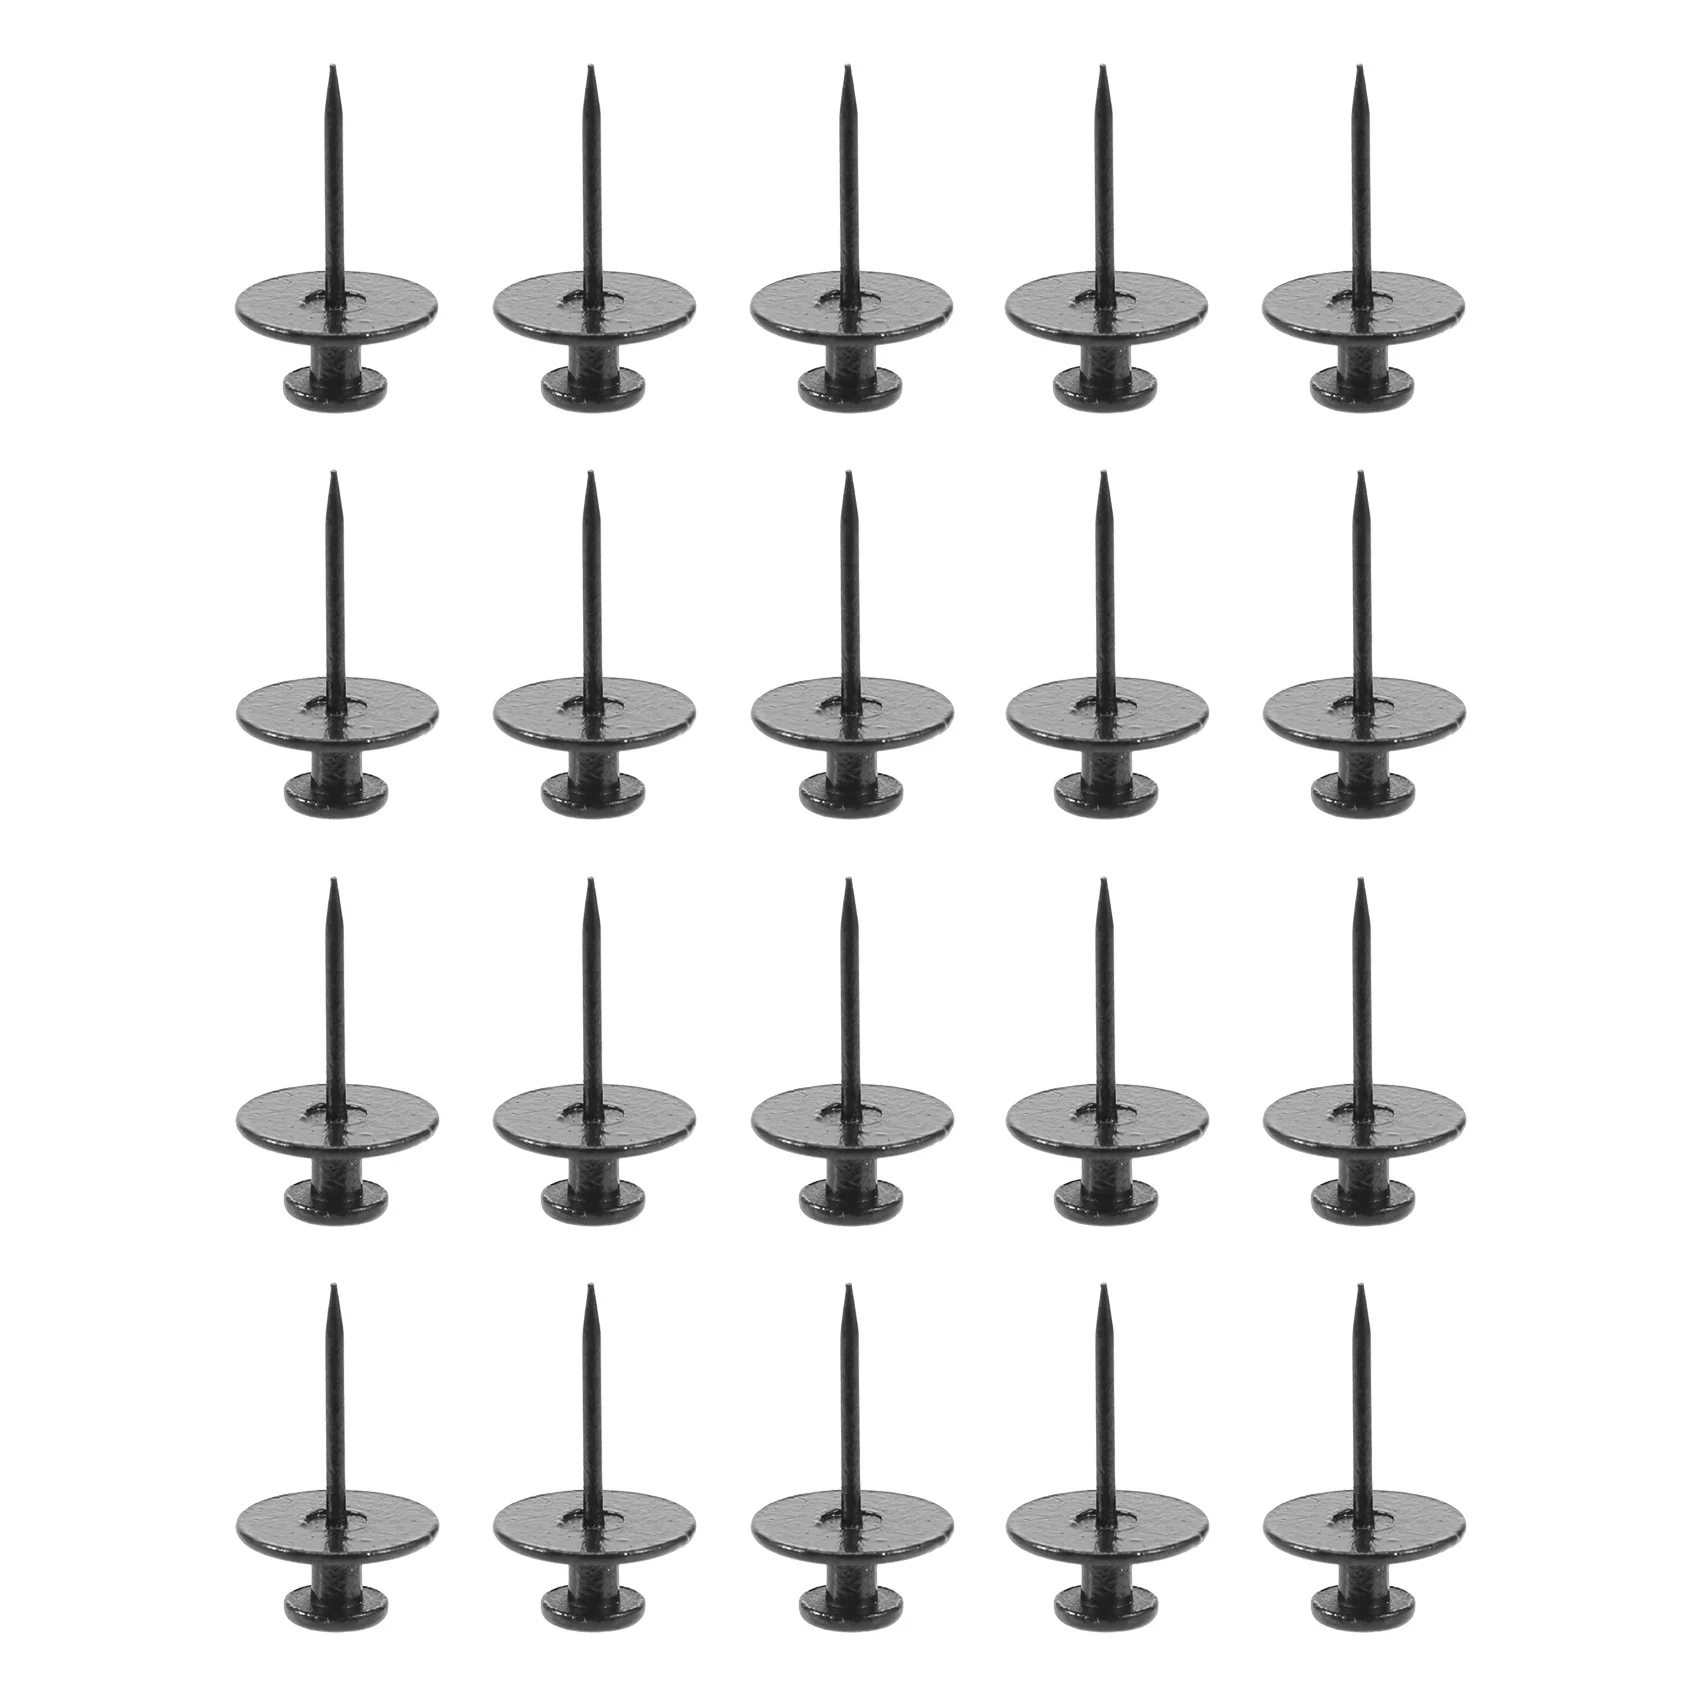 

20 Pack Small Nails for Picture Hanging Double-Headed Picture Hangers Nails Wall Nails for Hanging Pictures (Black)